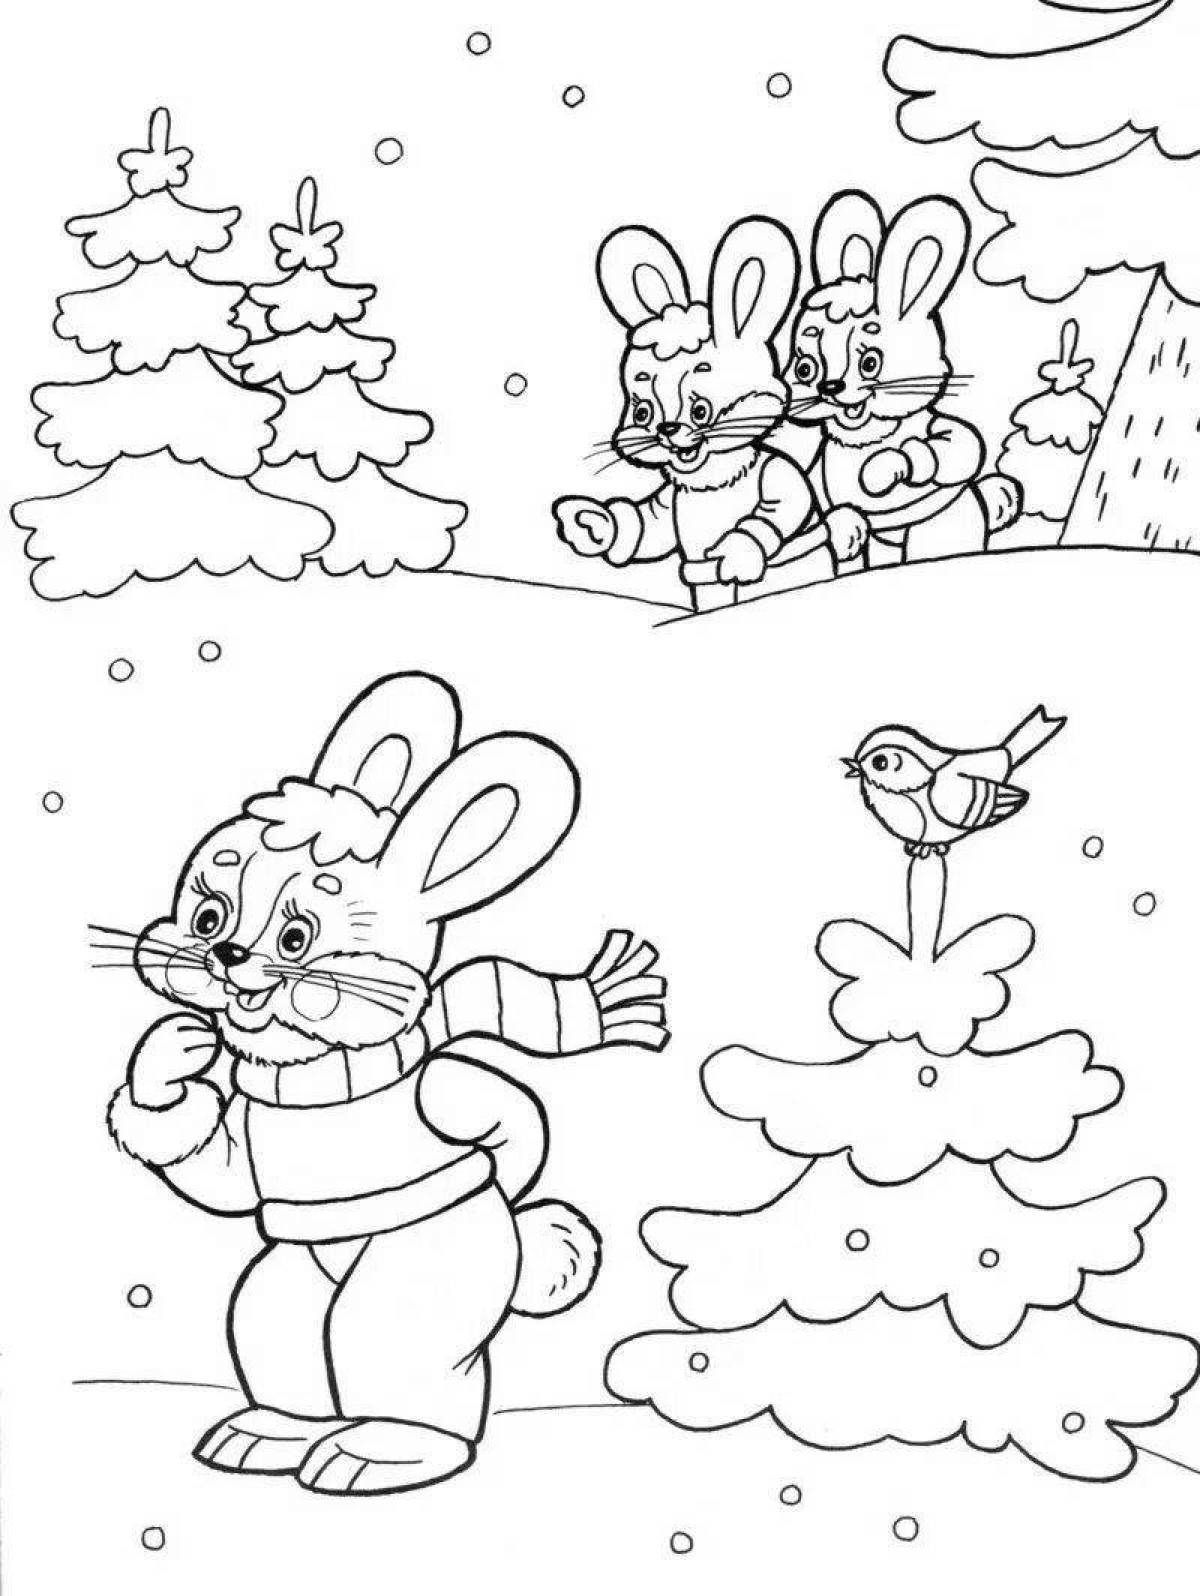 Colourful winter coloring book for children 6-7 years old